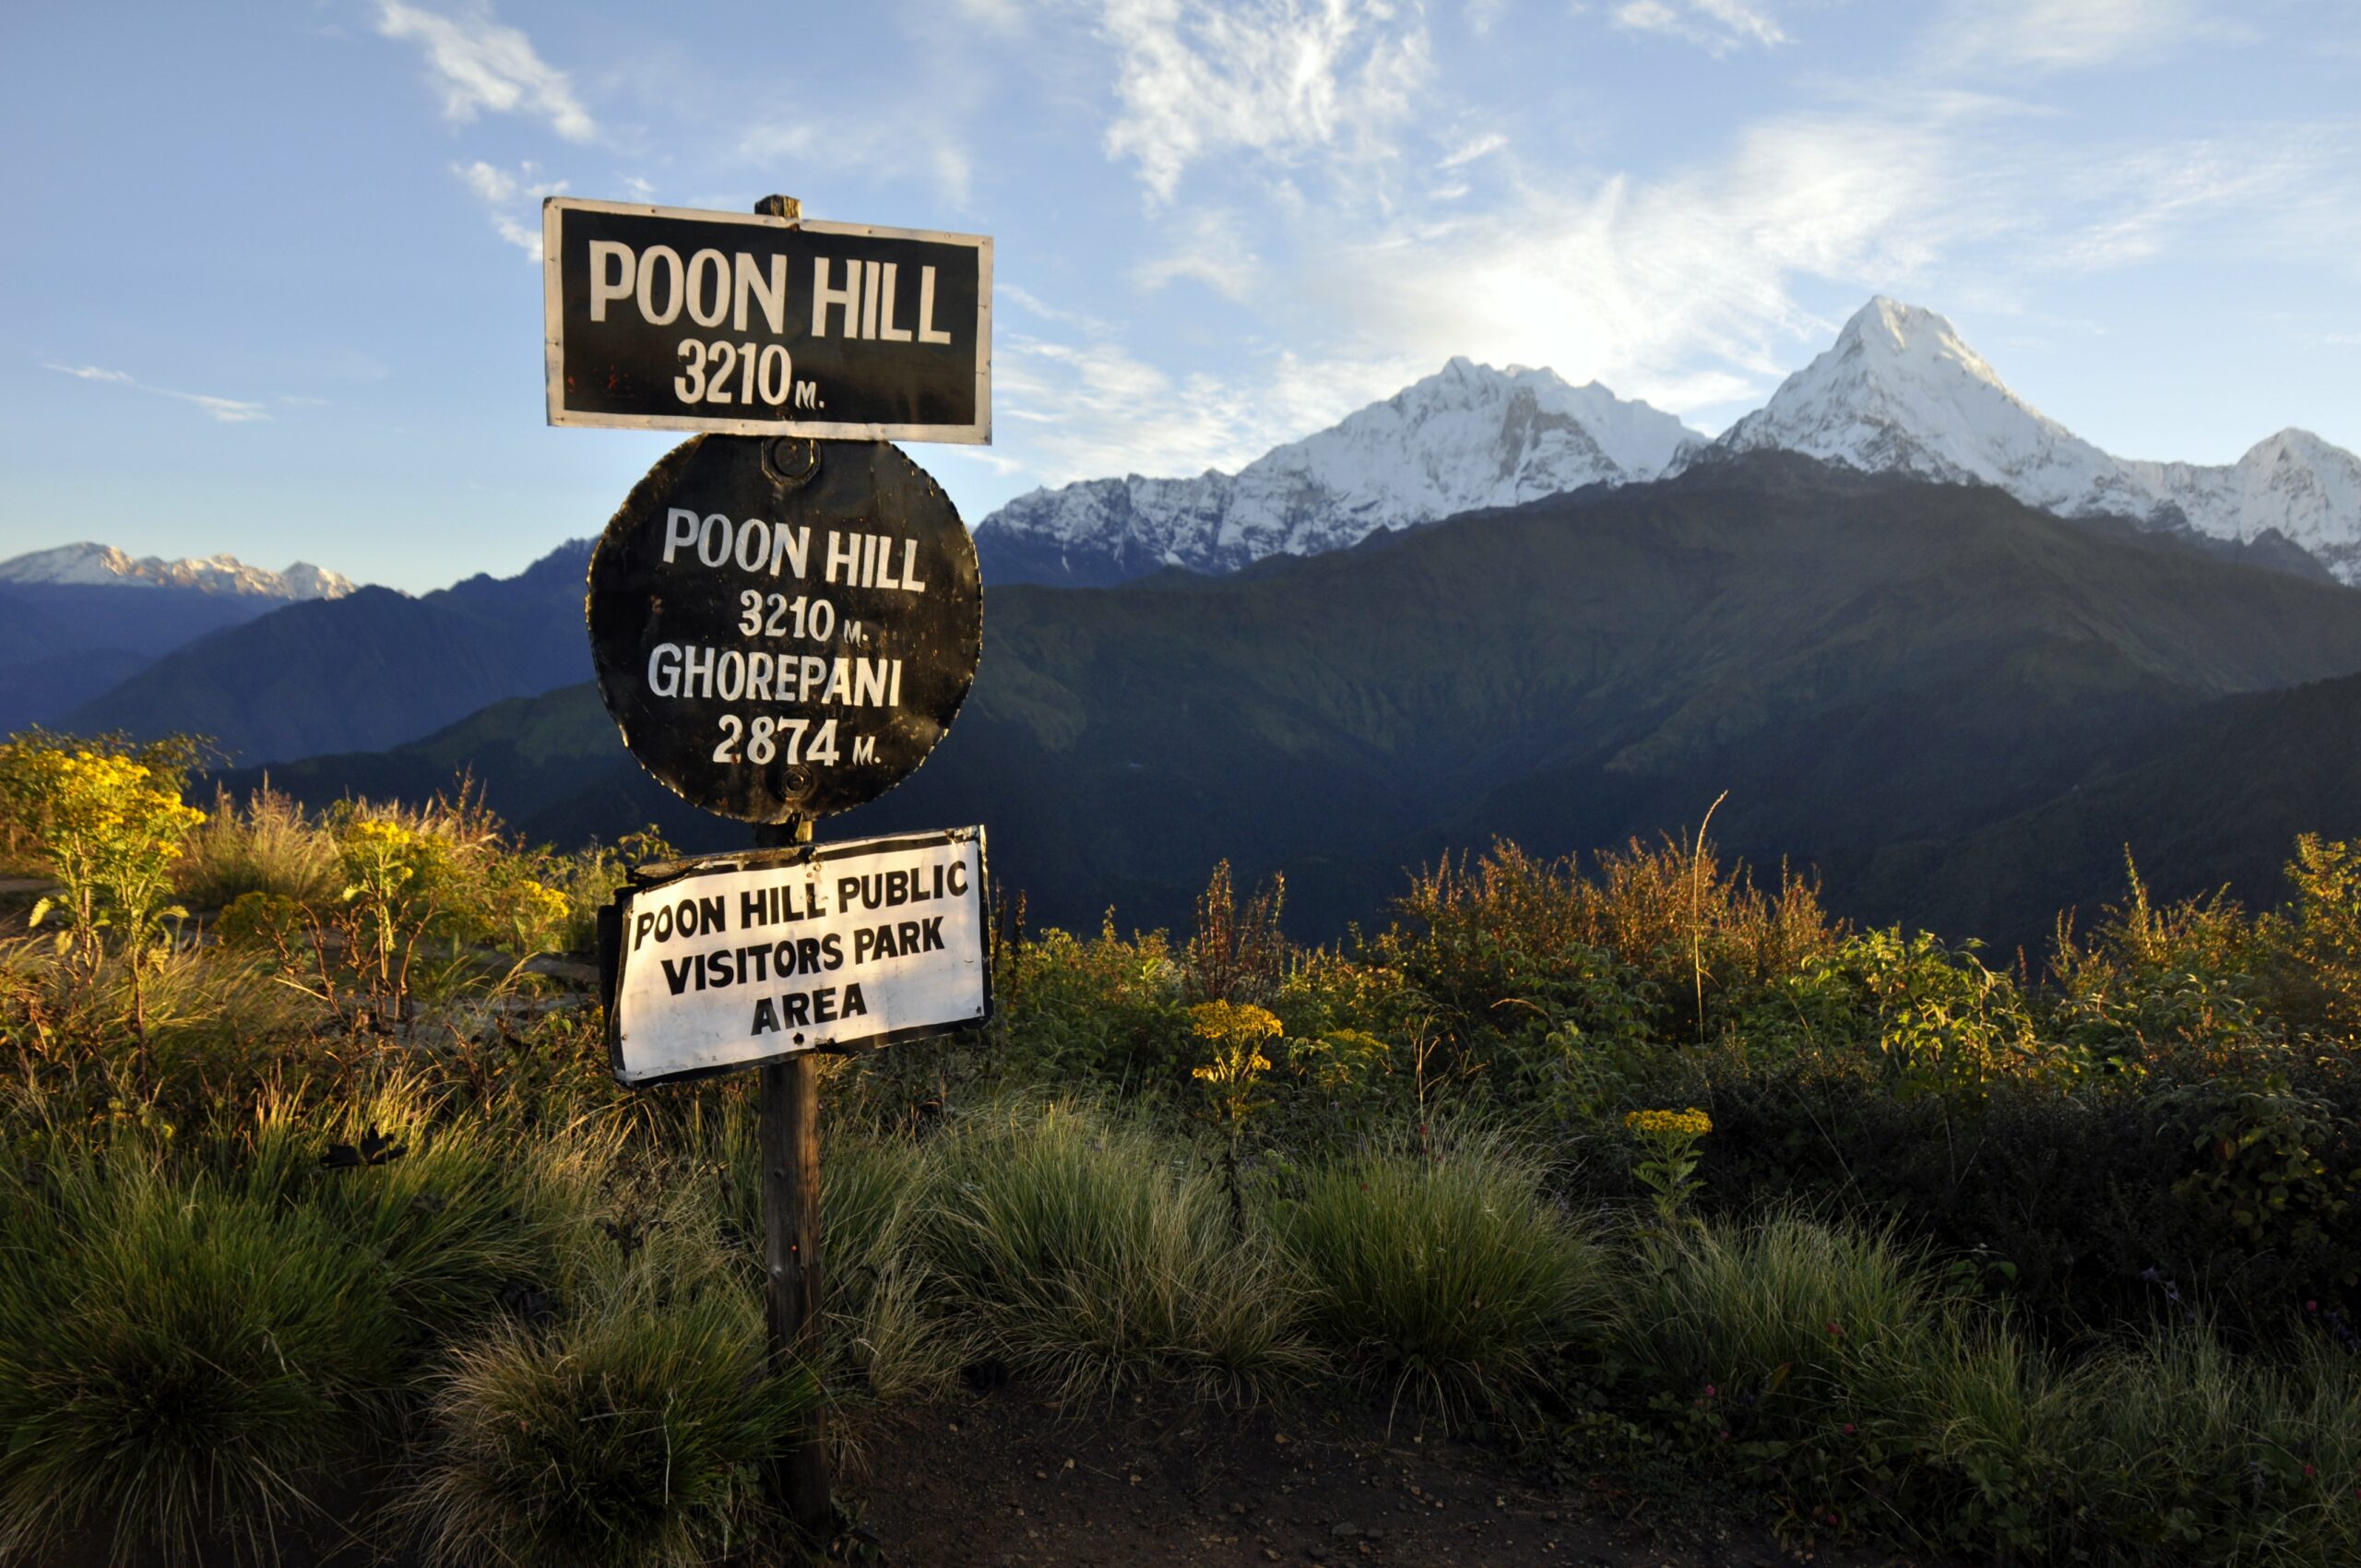 Ghorepani-Poon Hill trek features new tourism infrastructure